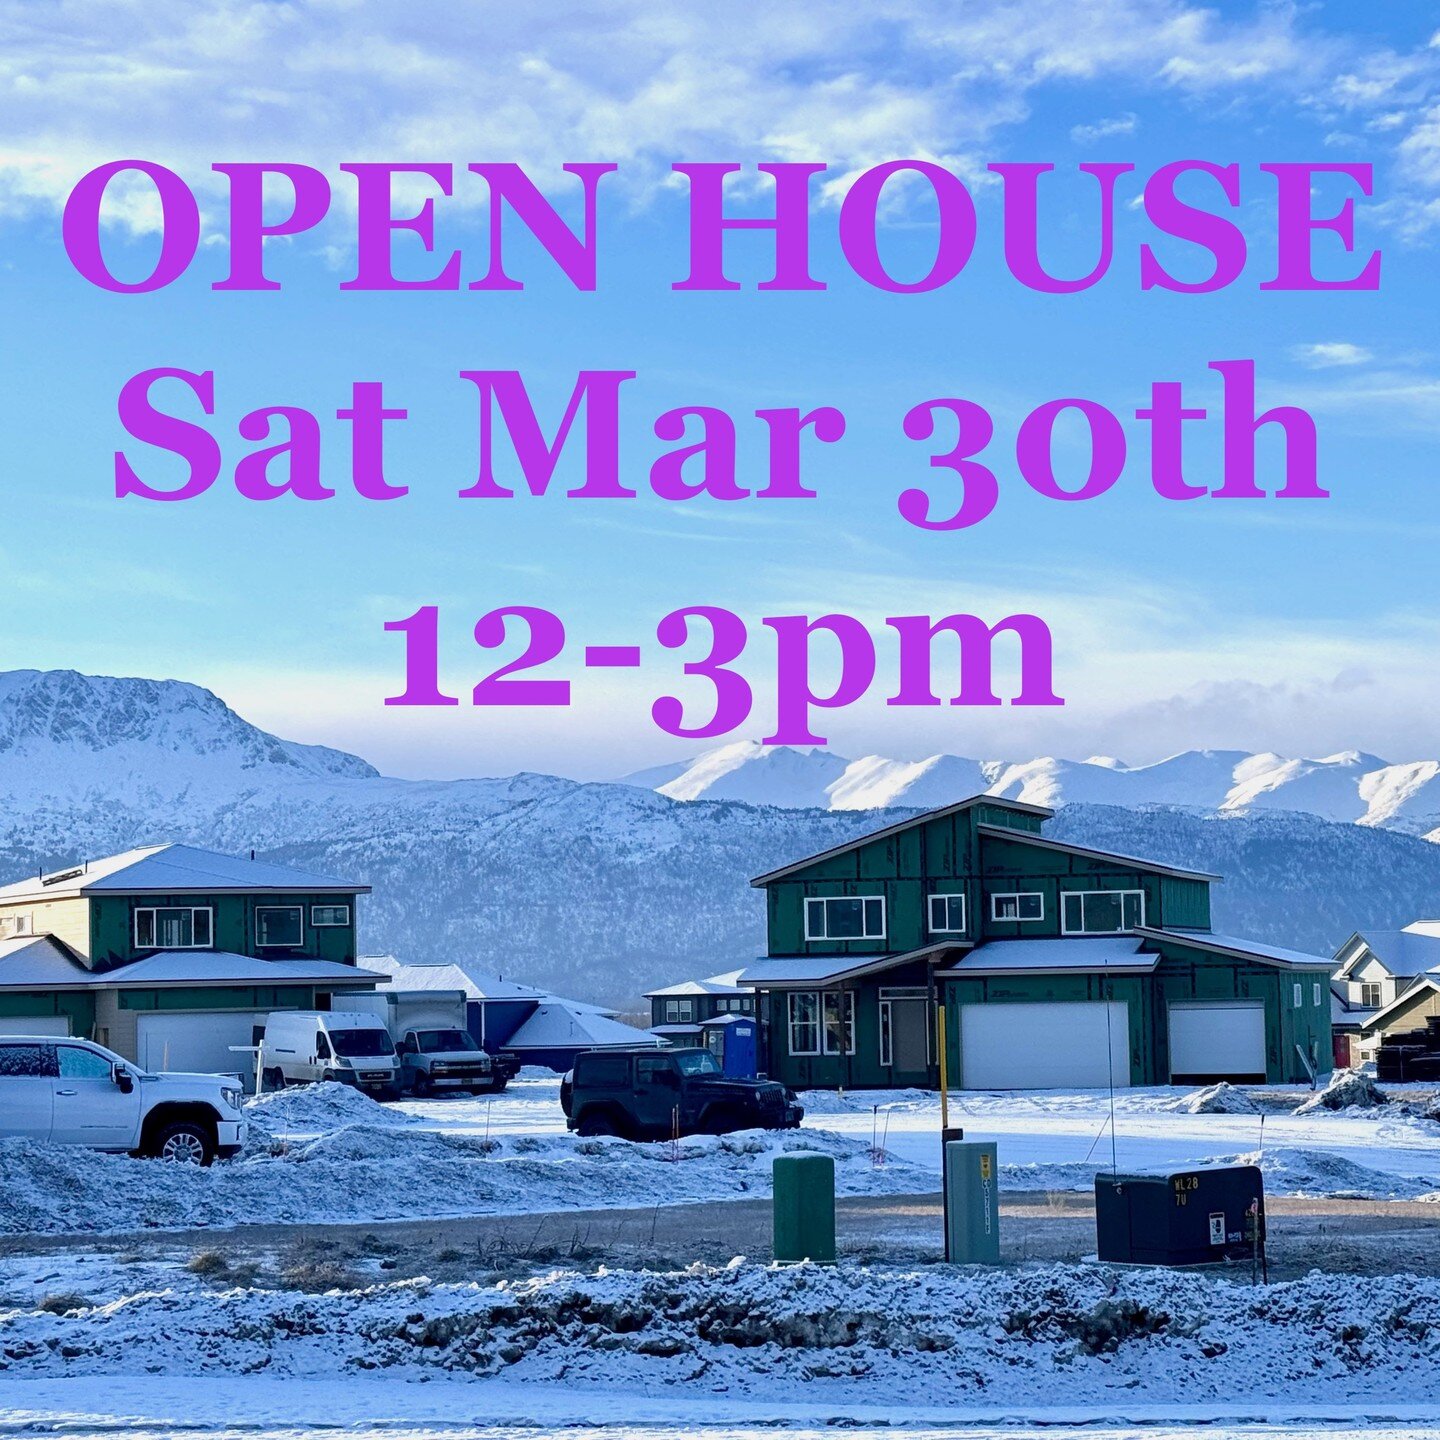 OPEN HOUSE this weekend on several Custom Homes in View Pointe. Drive thru and meet the teams and see what View Pointe is all about. There are now 7 yes 7 Custom Home Builders in View Pointe. #stemeducation #bikepath #wasilla #palmeralaska #anchorage